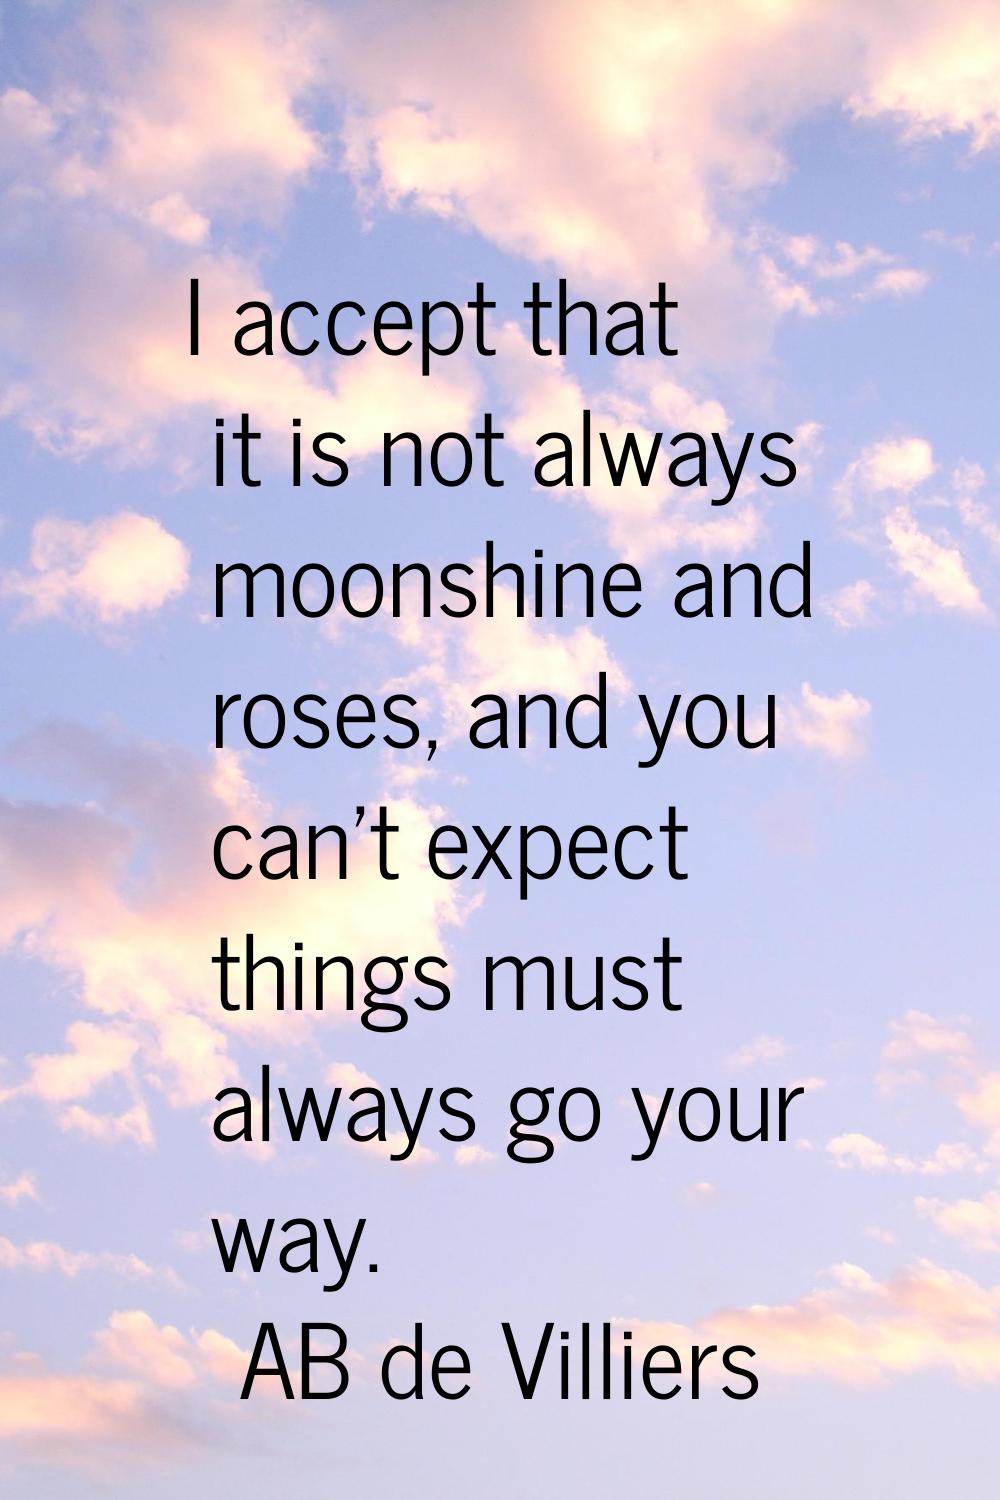 I accept that it is not always moonshine and roses, and you can't expect things must always go your